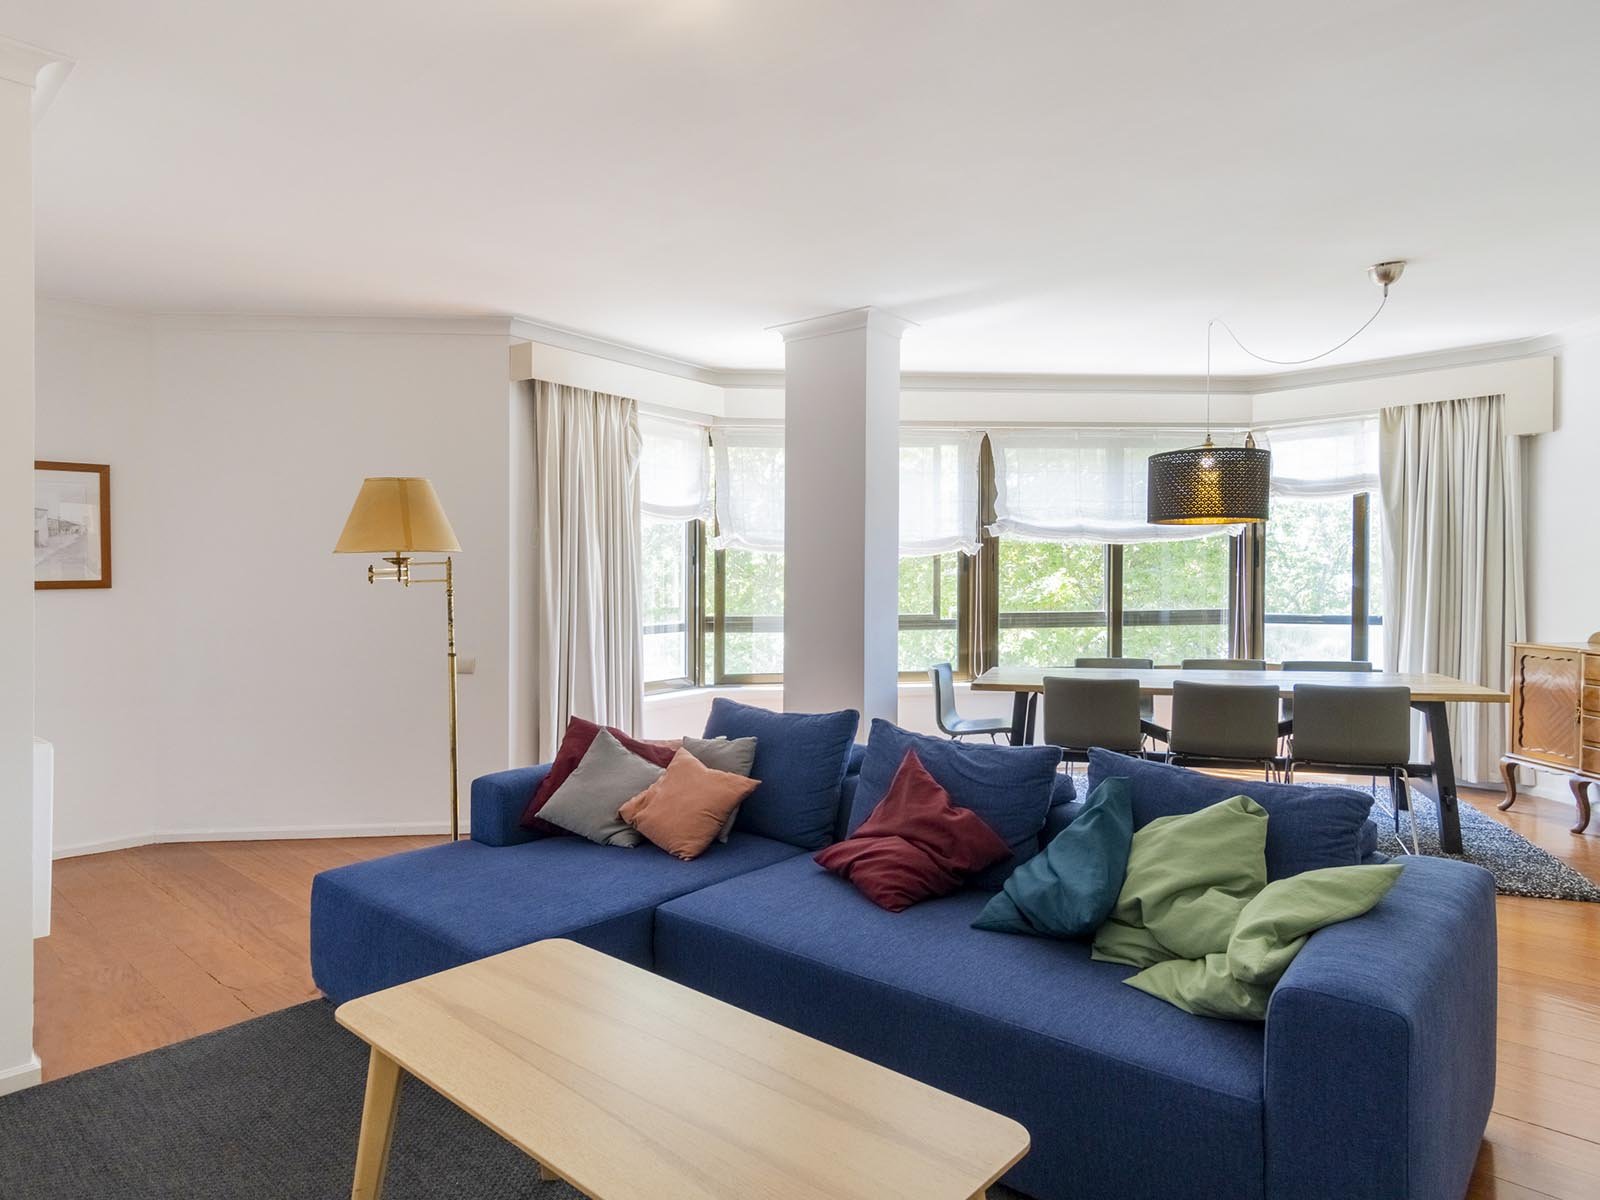 4-bedroom apartment with Local Accommodation license Combatentes Porto